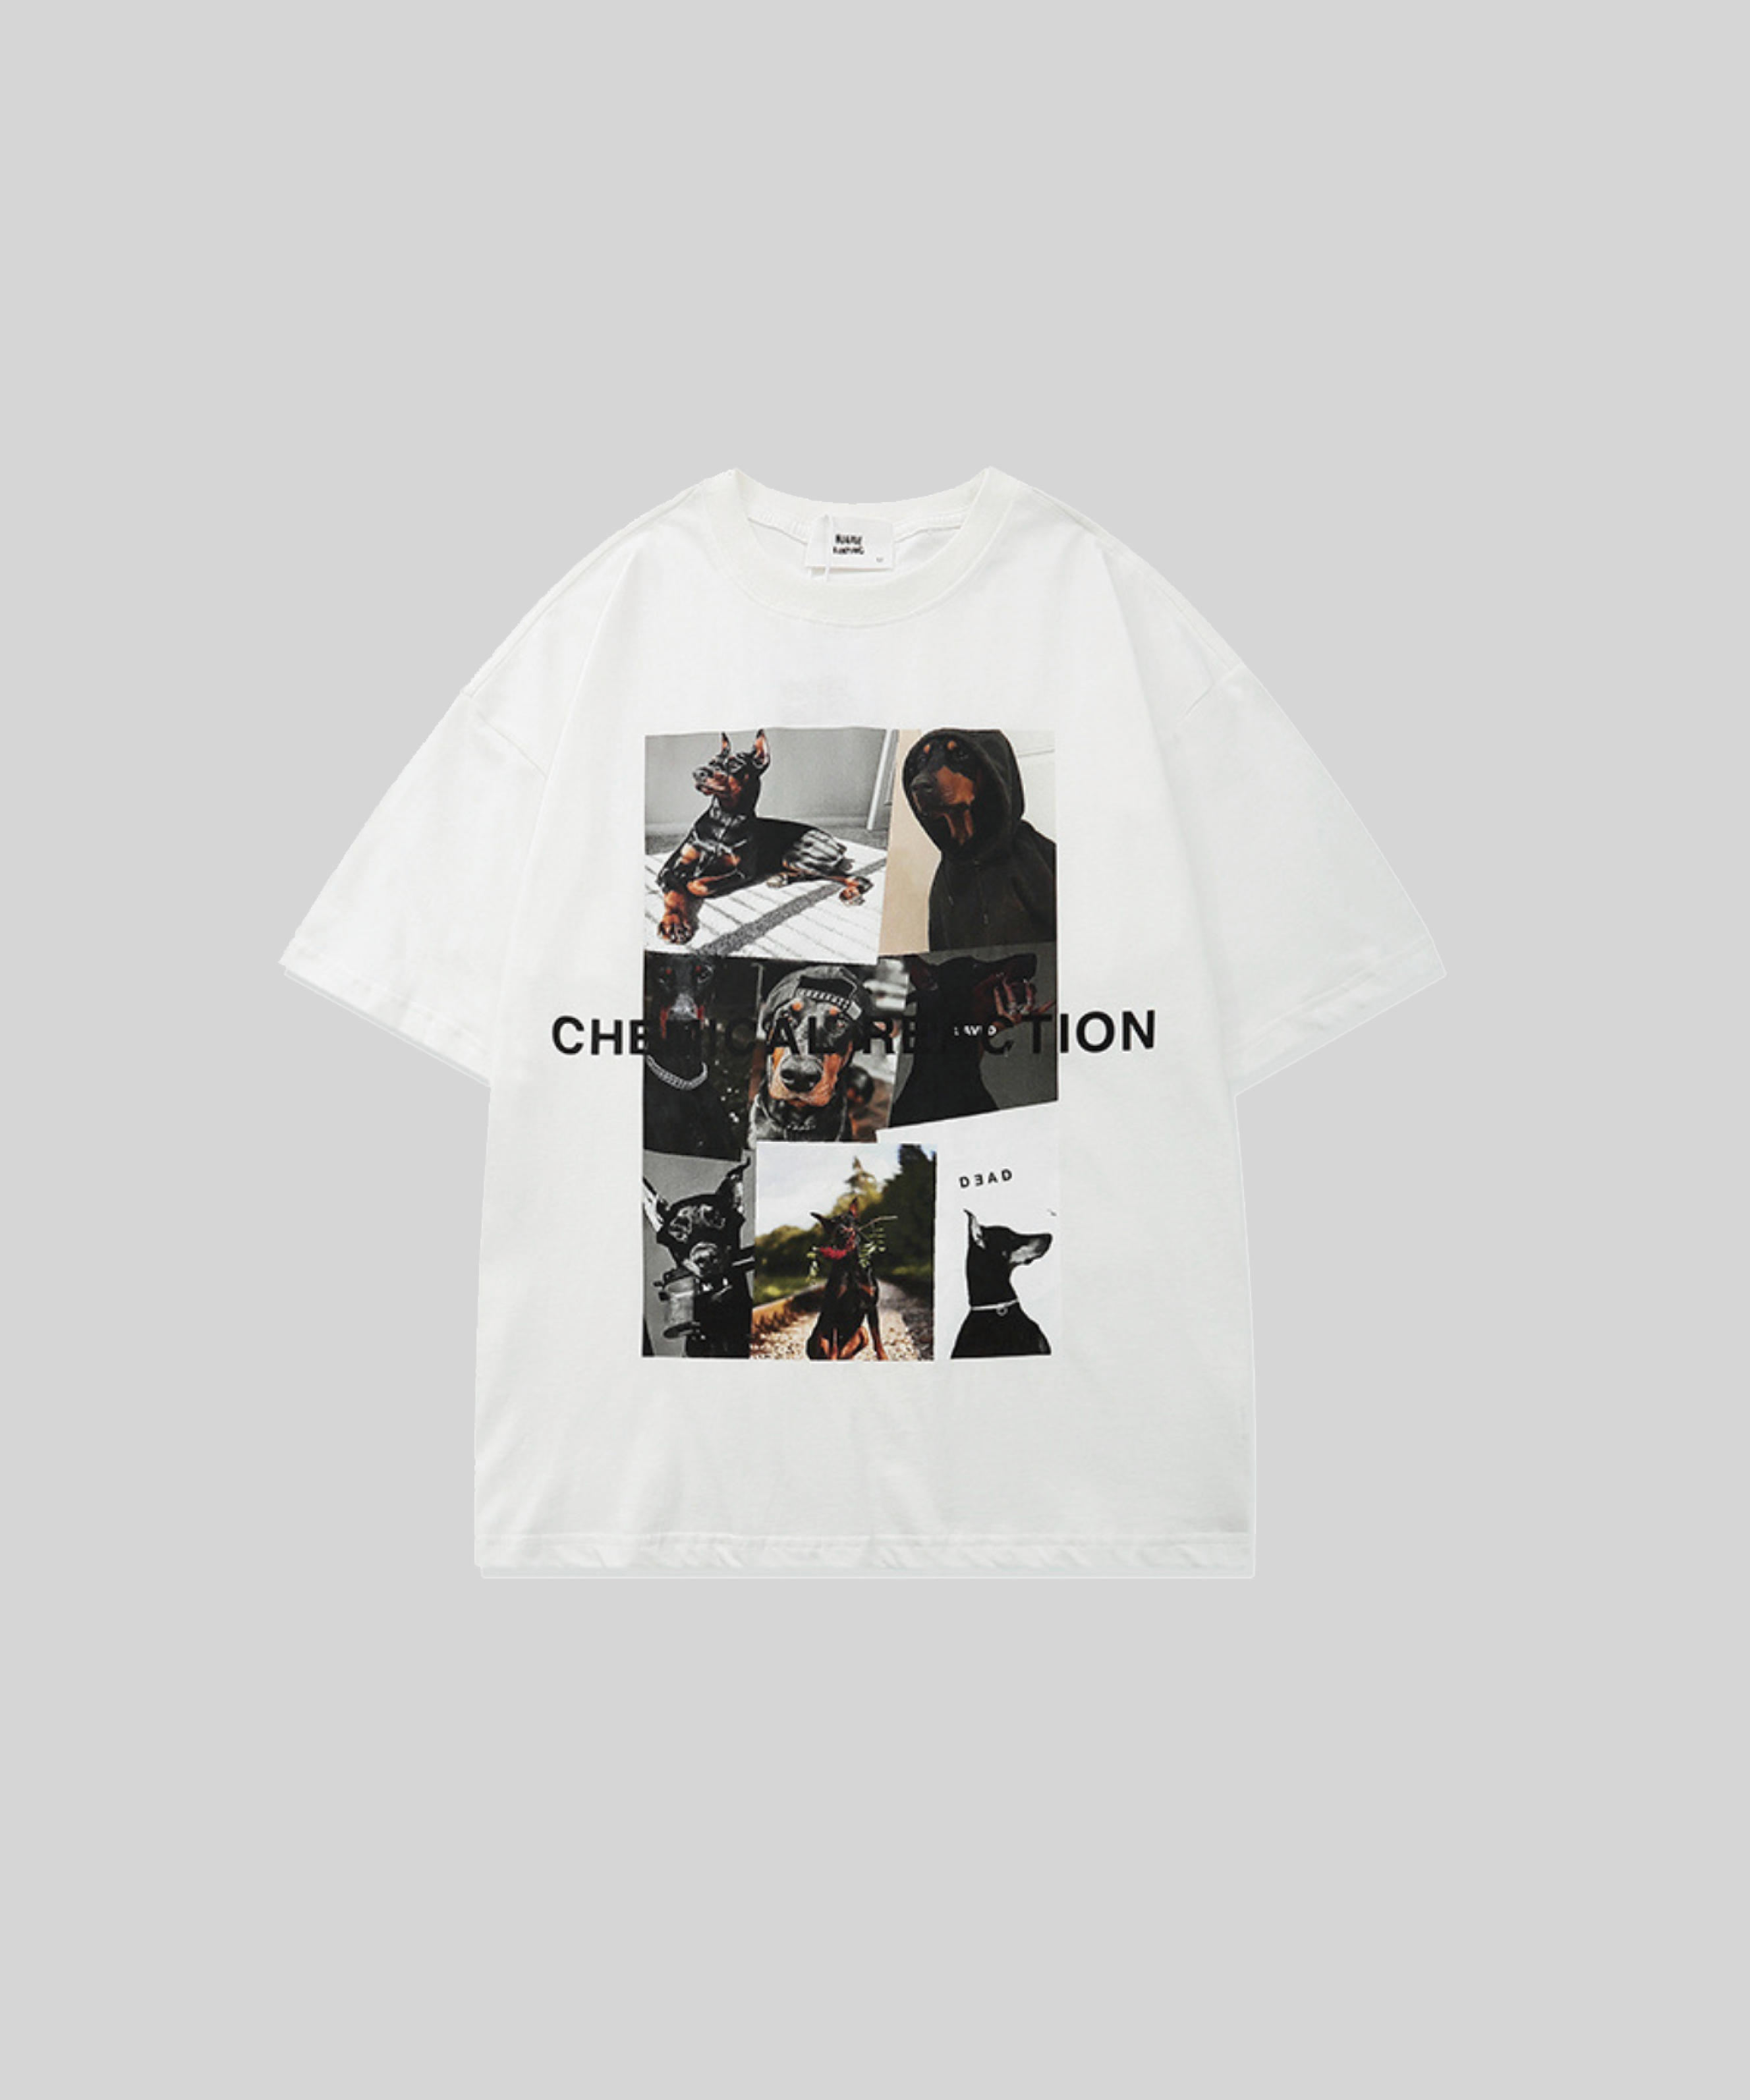 Chemical reaction・Graphic T